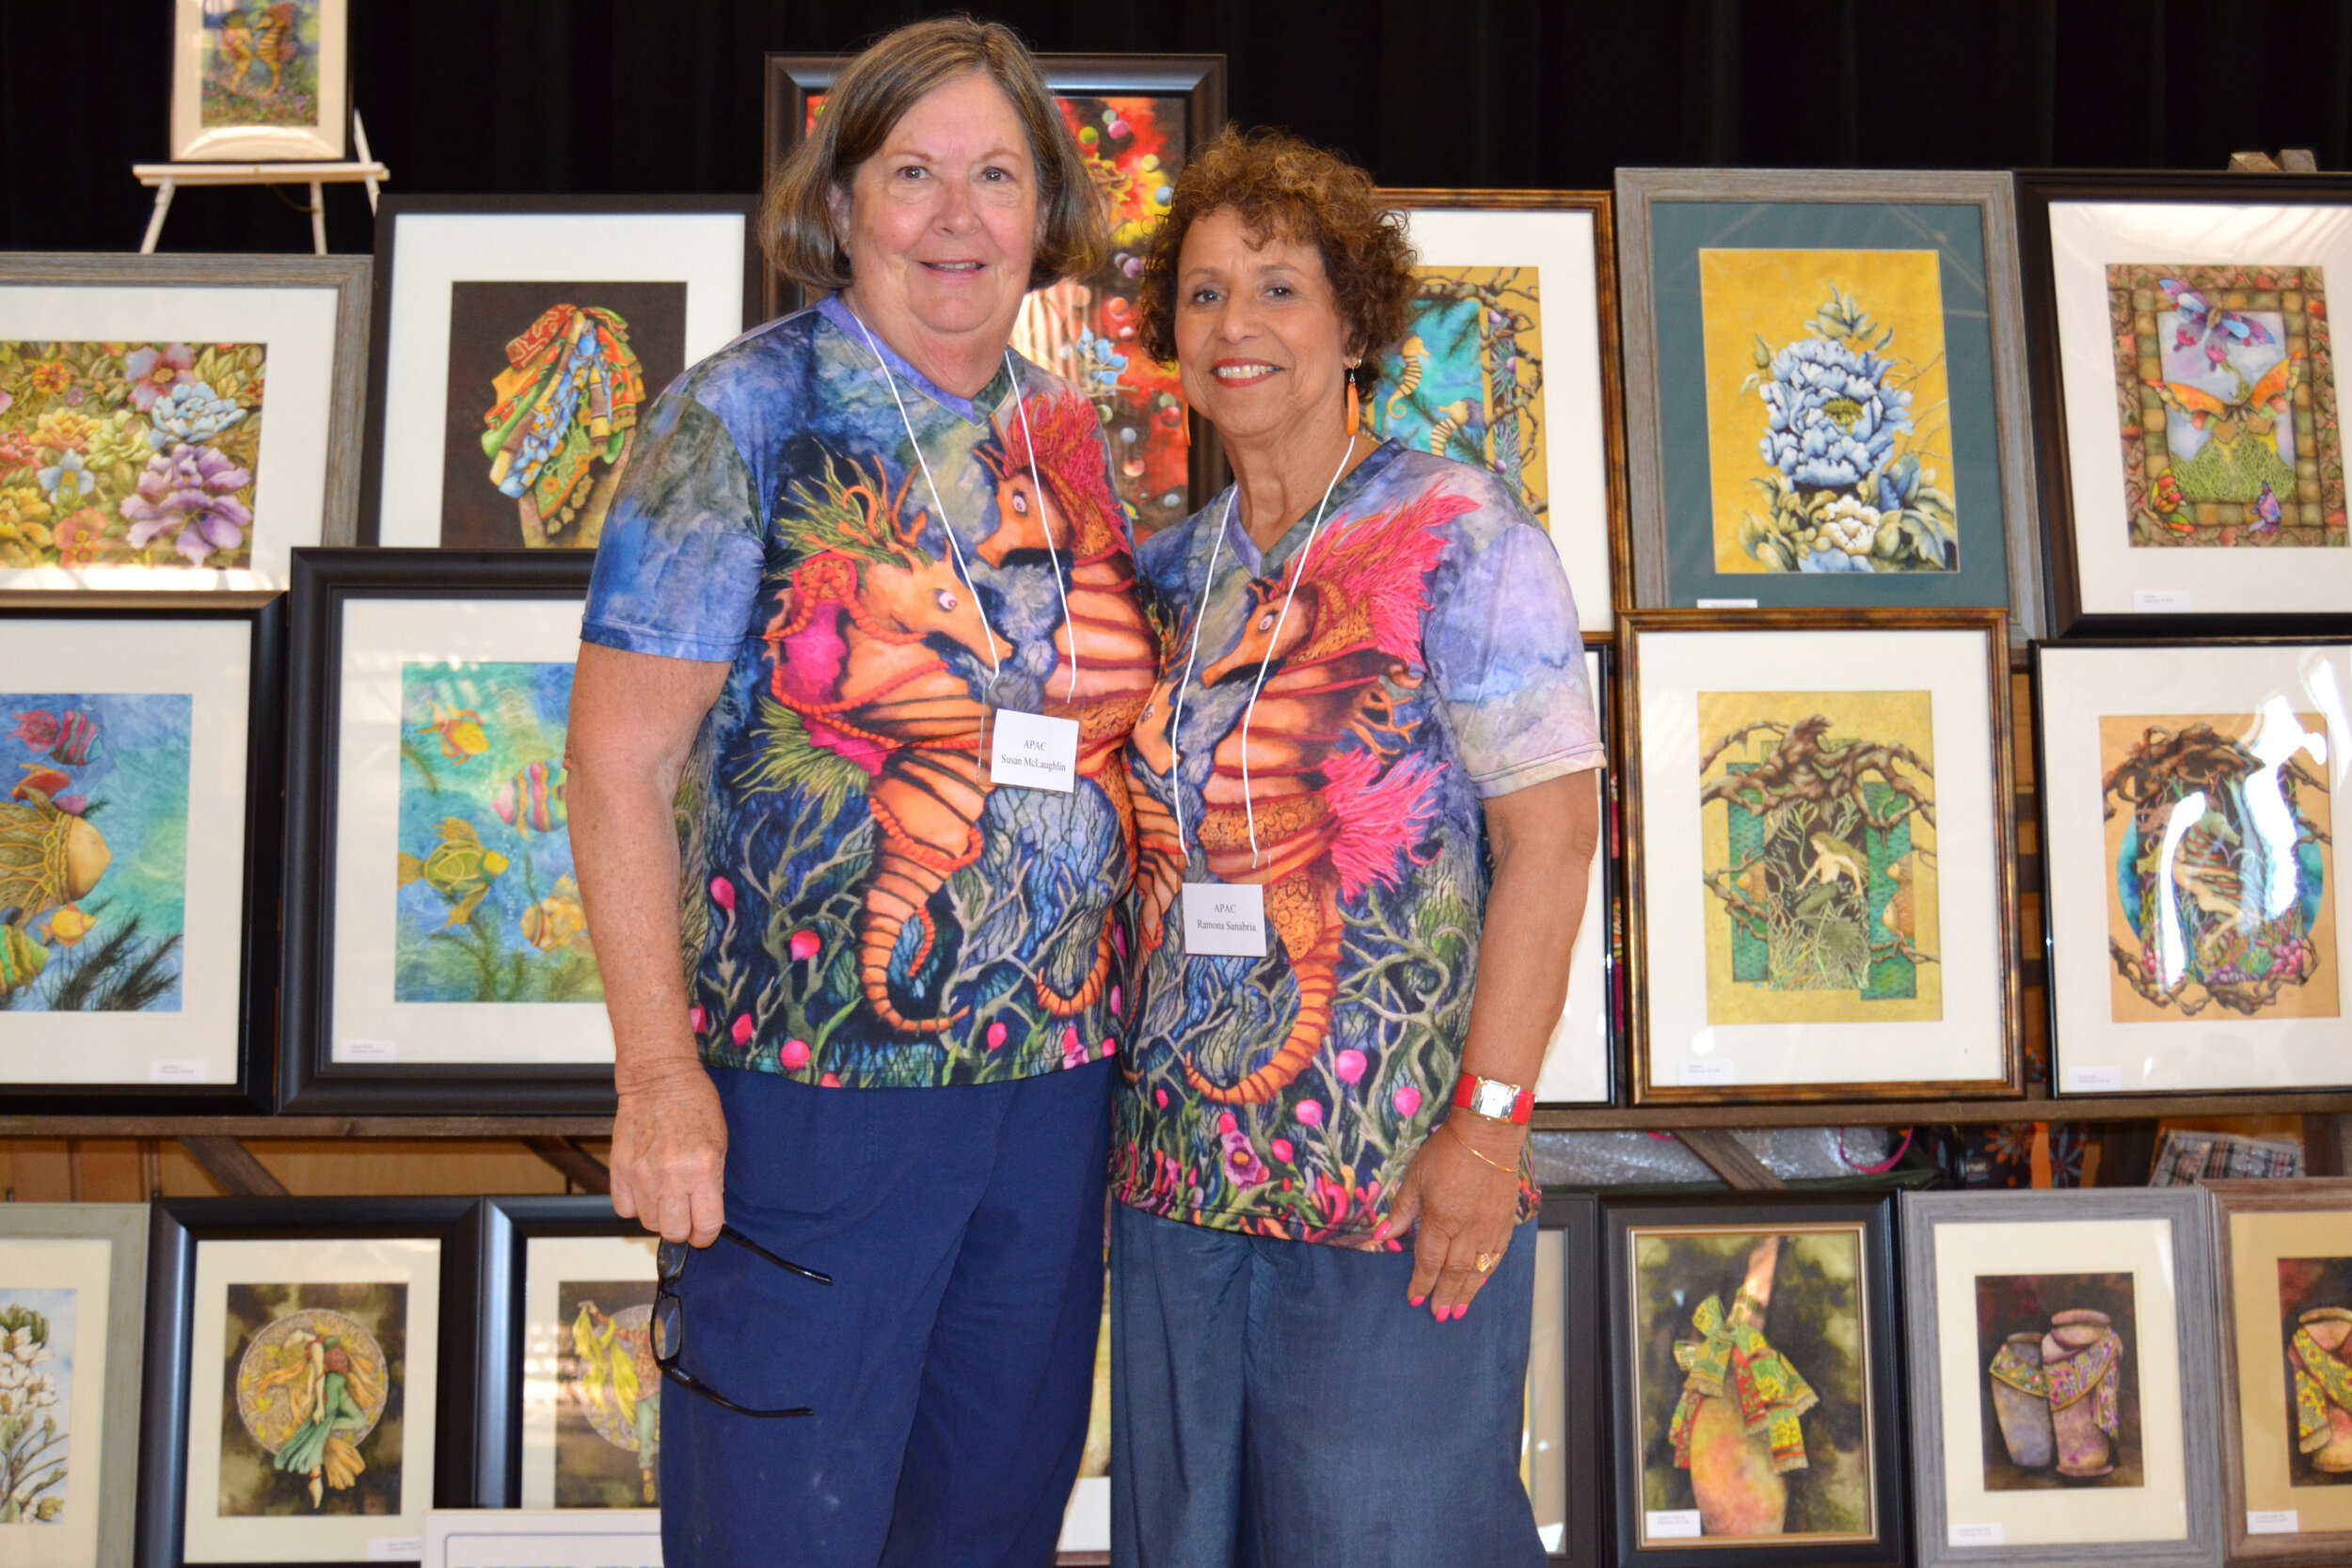 APAC chairperson Susan MacLaughlin (left) and  president Ramona Sanabria at the Art Show.